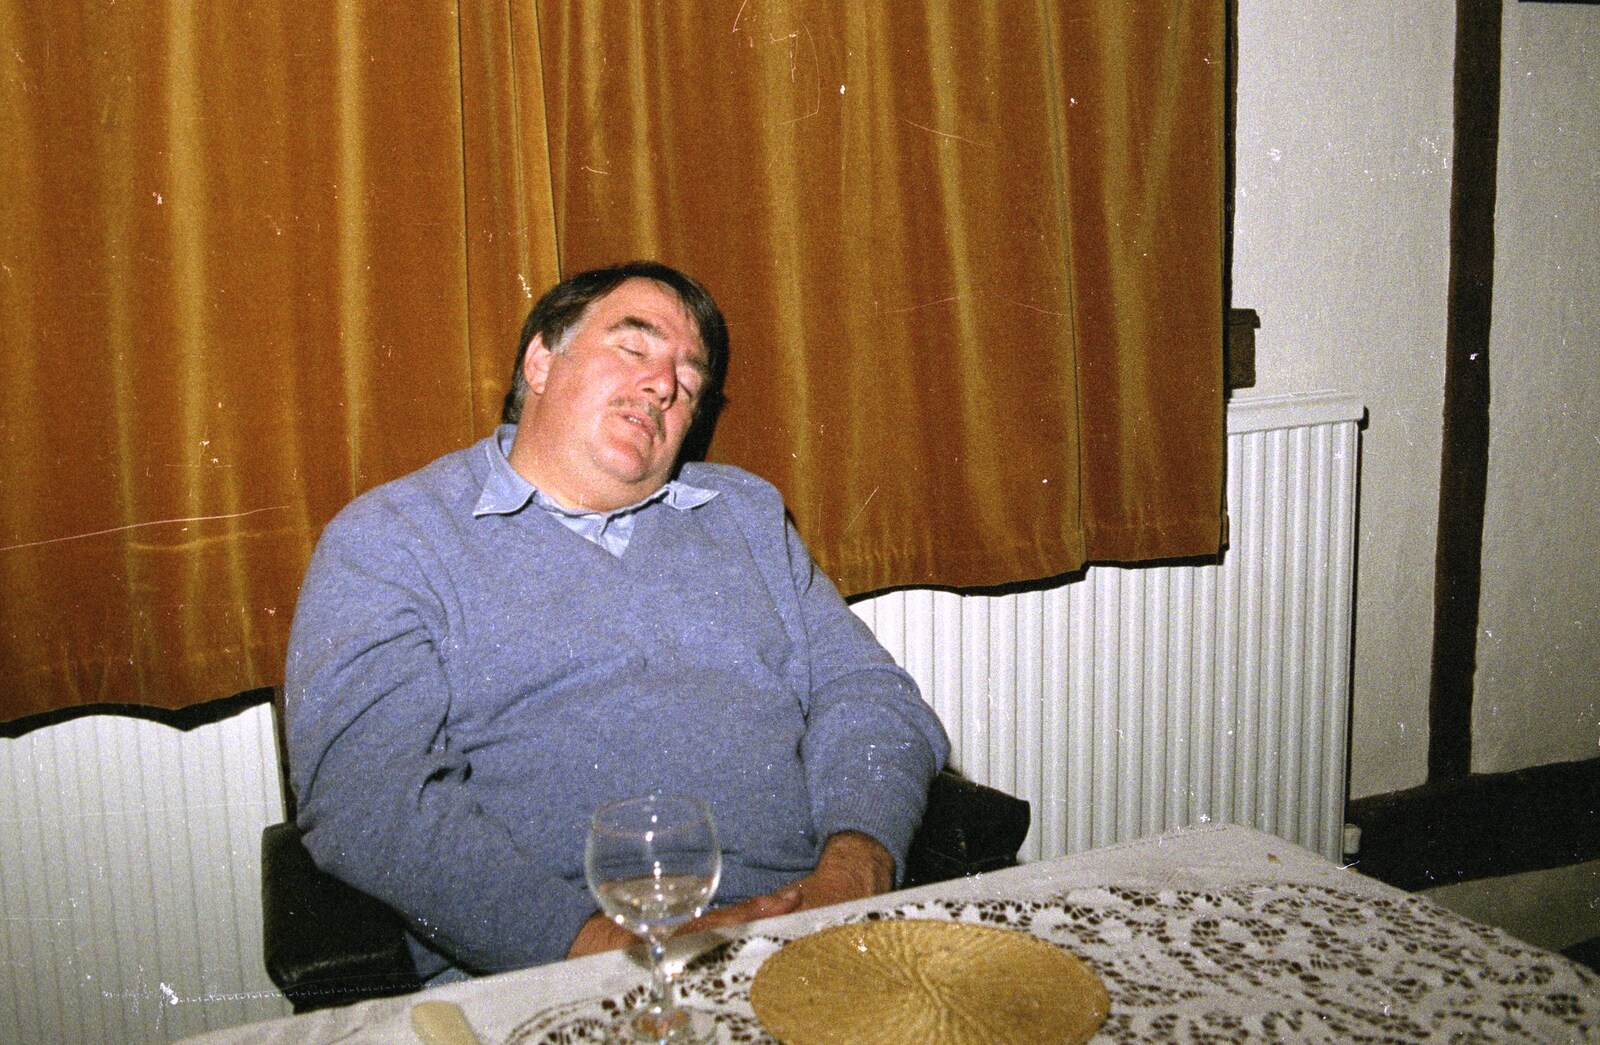 Corky's asleep from Cider Making, Stuston, Suffolk - 14th October 1991